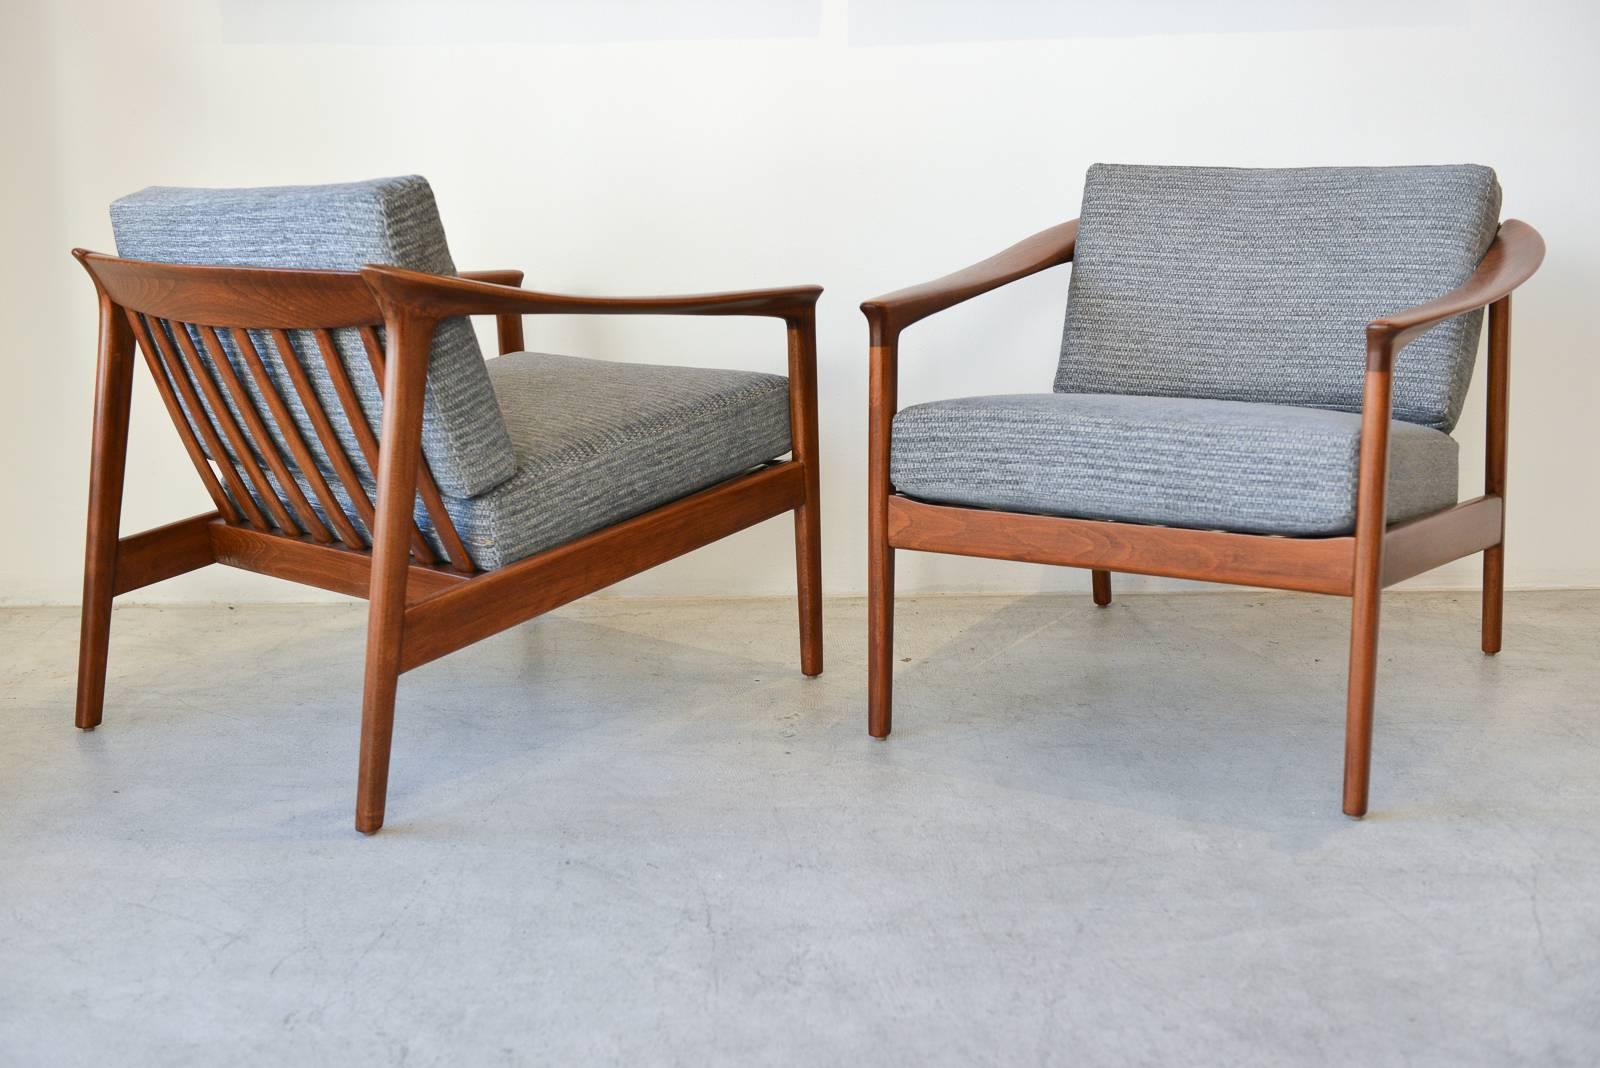 Swedish Pair of Sculpted Lounge Chairs by Folke Ohlsson for Bodafors Sweden, circa 1960